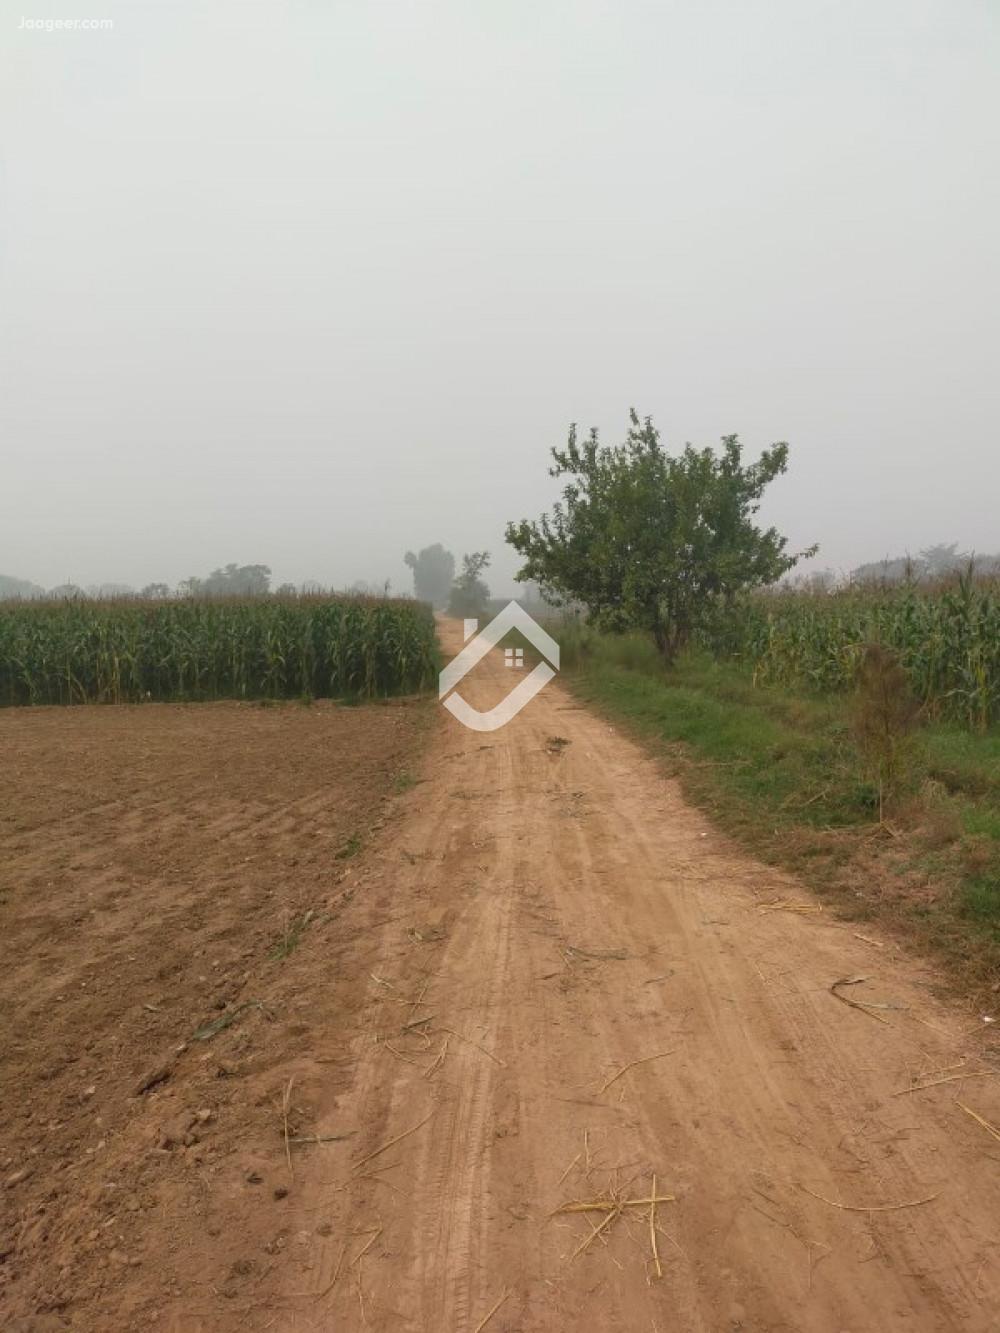 55 Kanal Agricultural Land For Sale In Chak No 34 S.B in Chak No 34 S.B, Sargodha